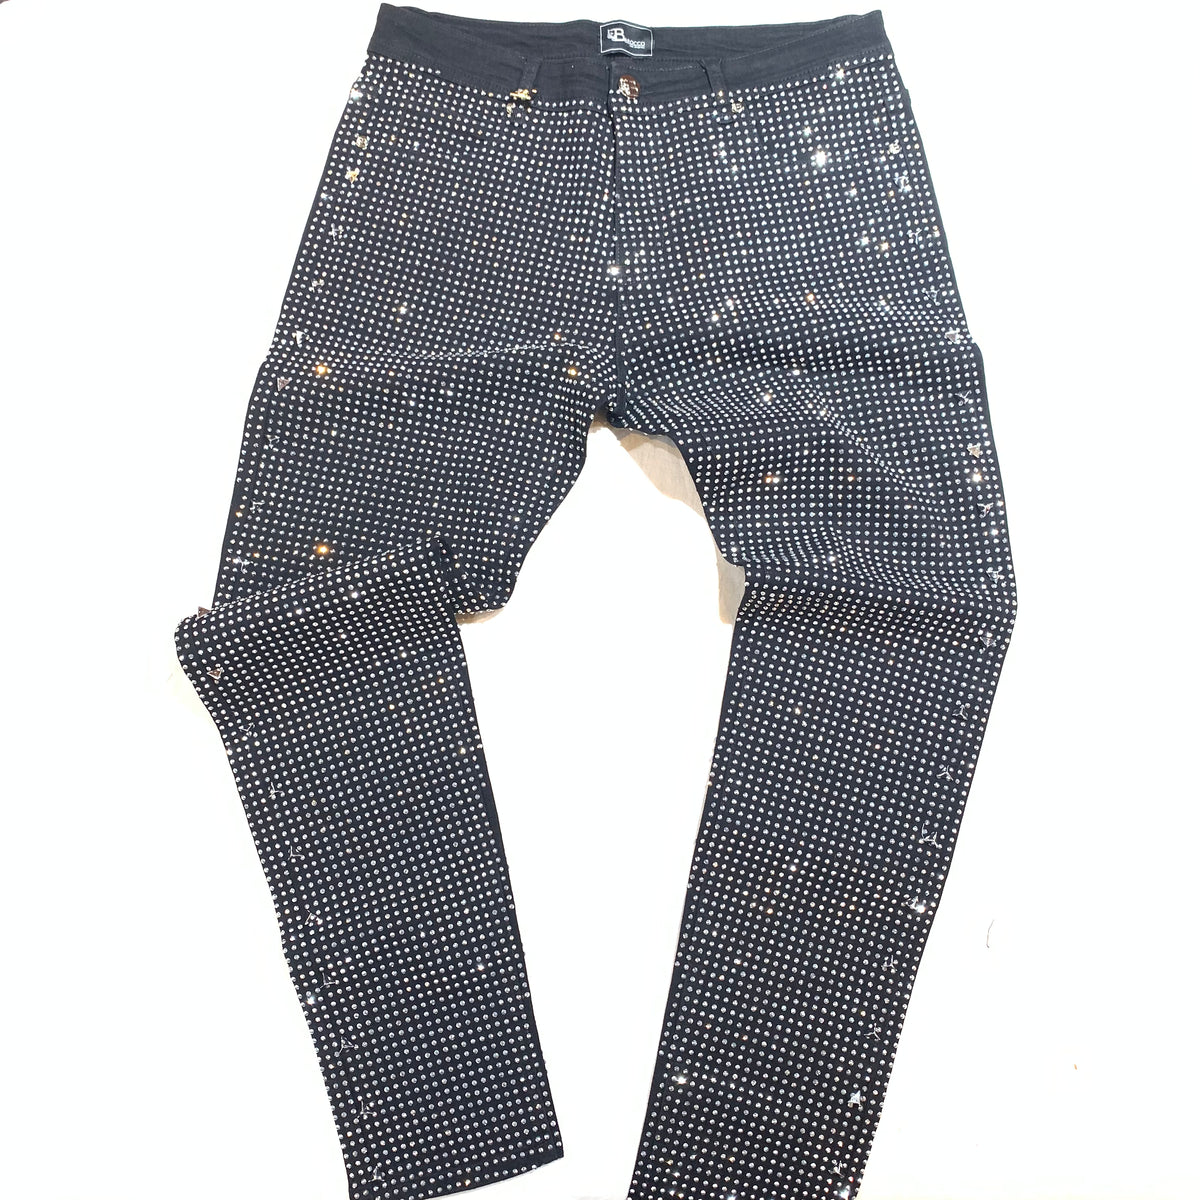 Barocco Black Fully Loaded White Crystal Spiked Jeans - Dudes Boutique